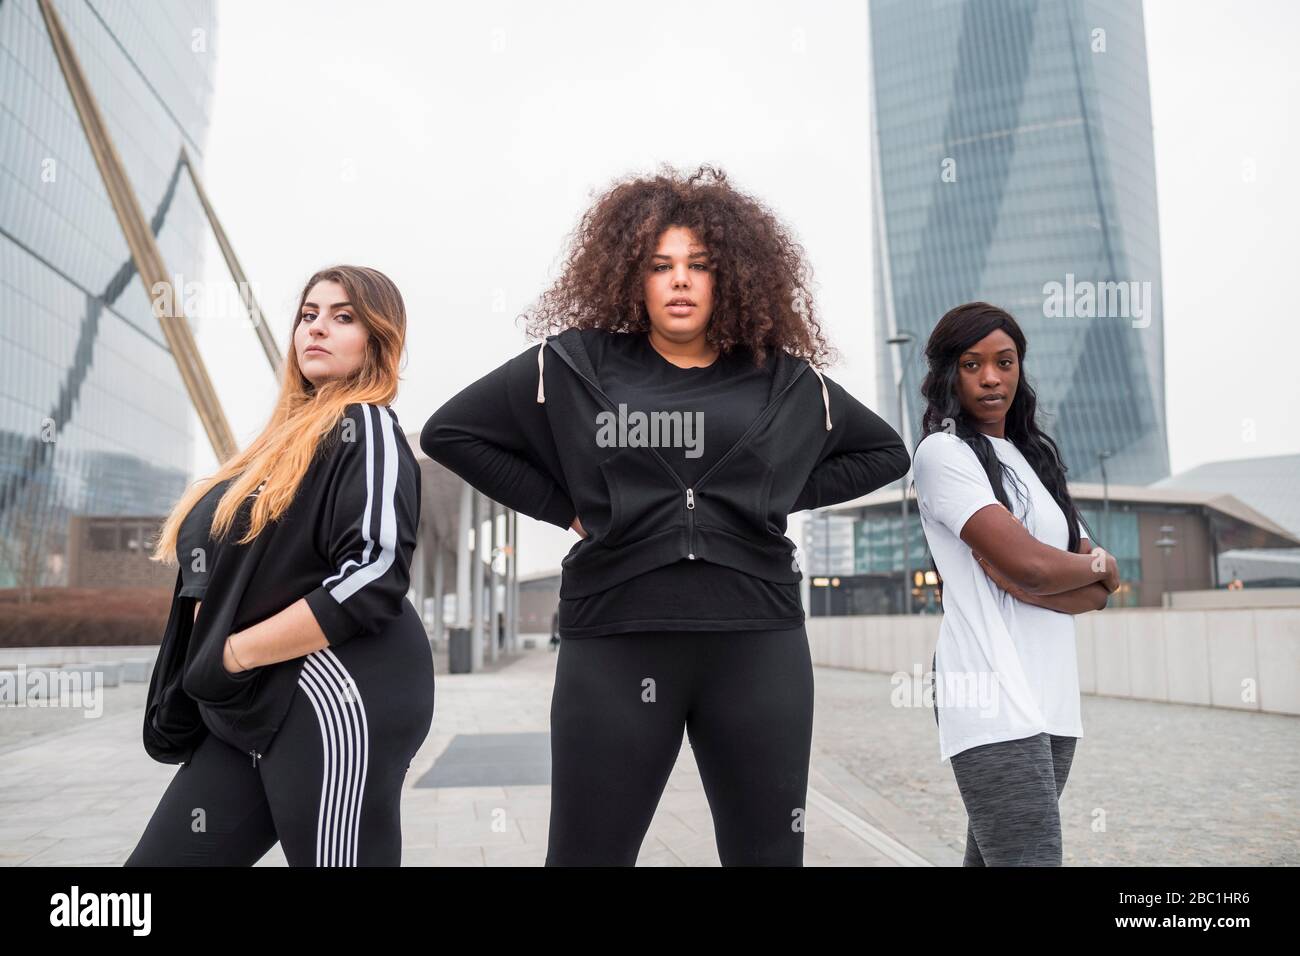 Three sportive young women posing in the city Stock Photo